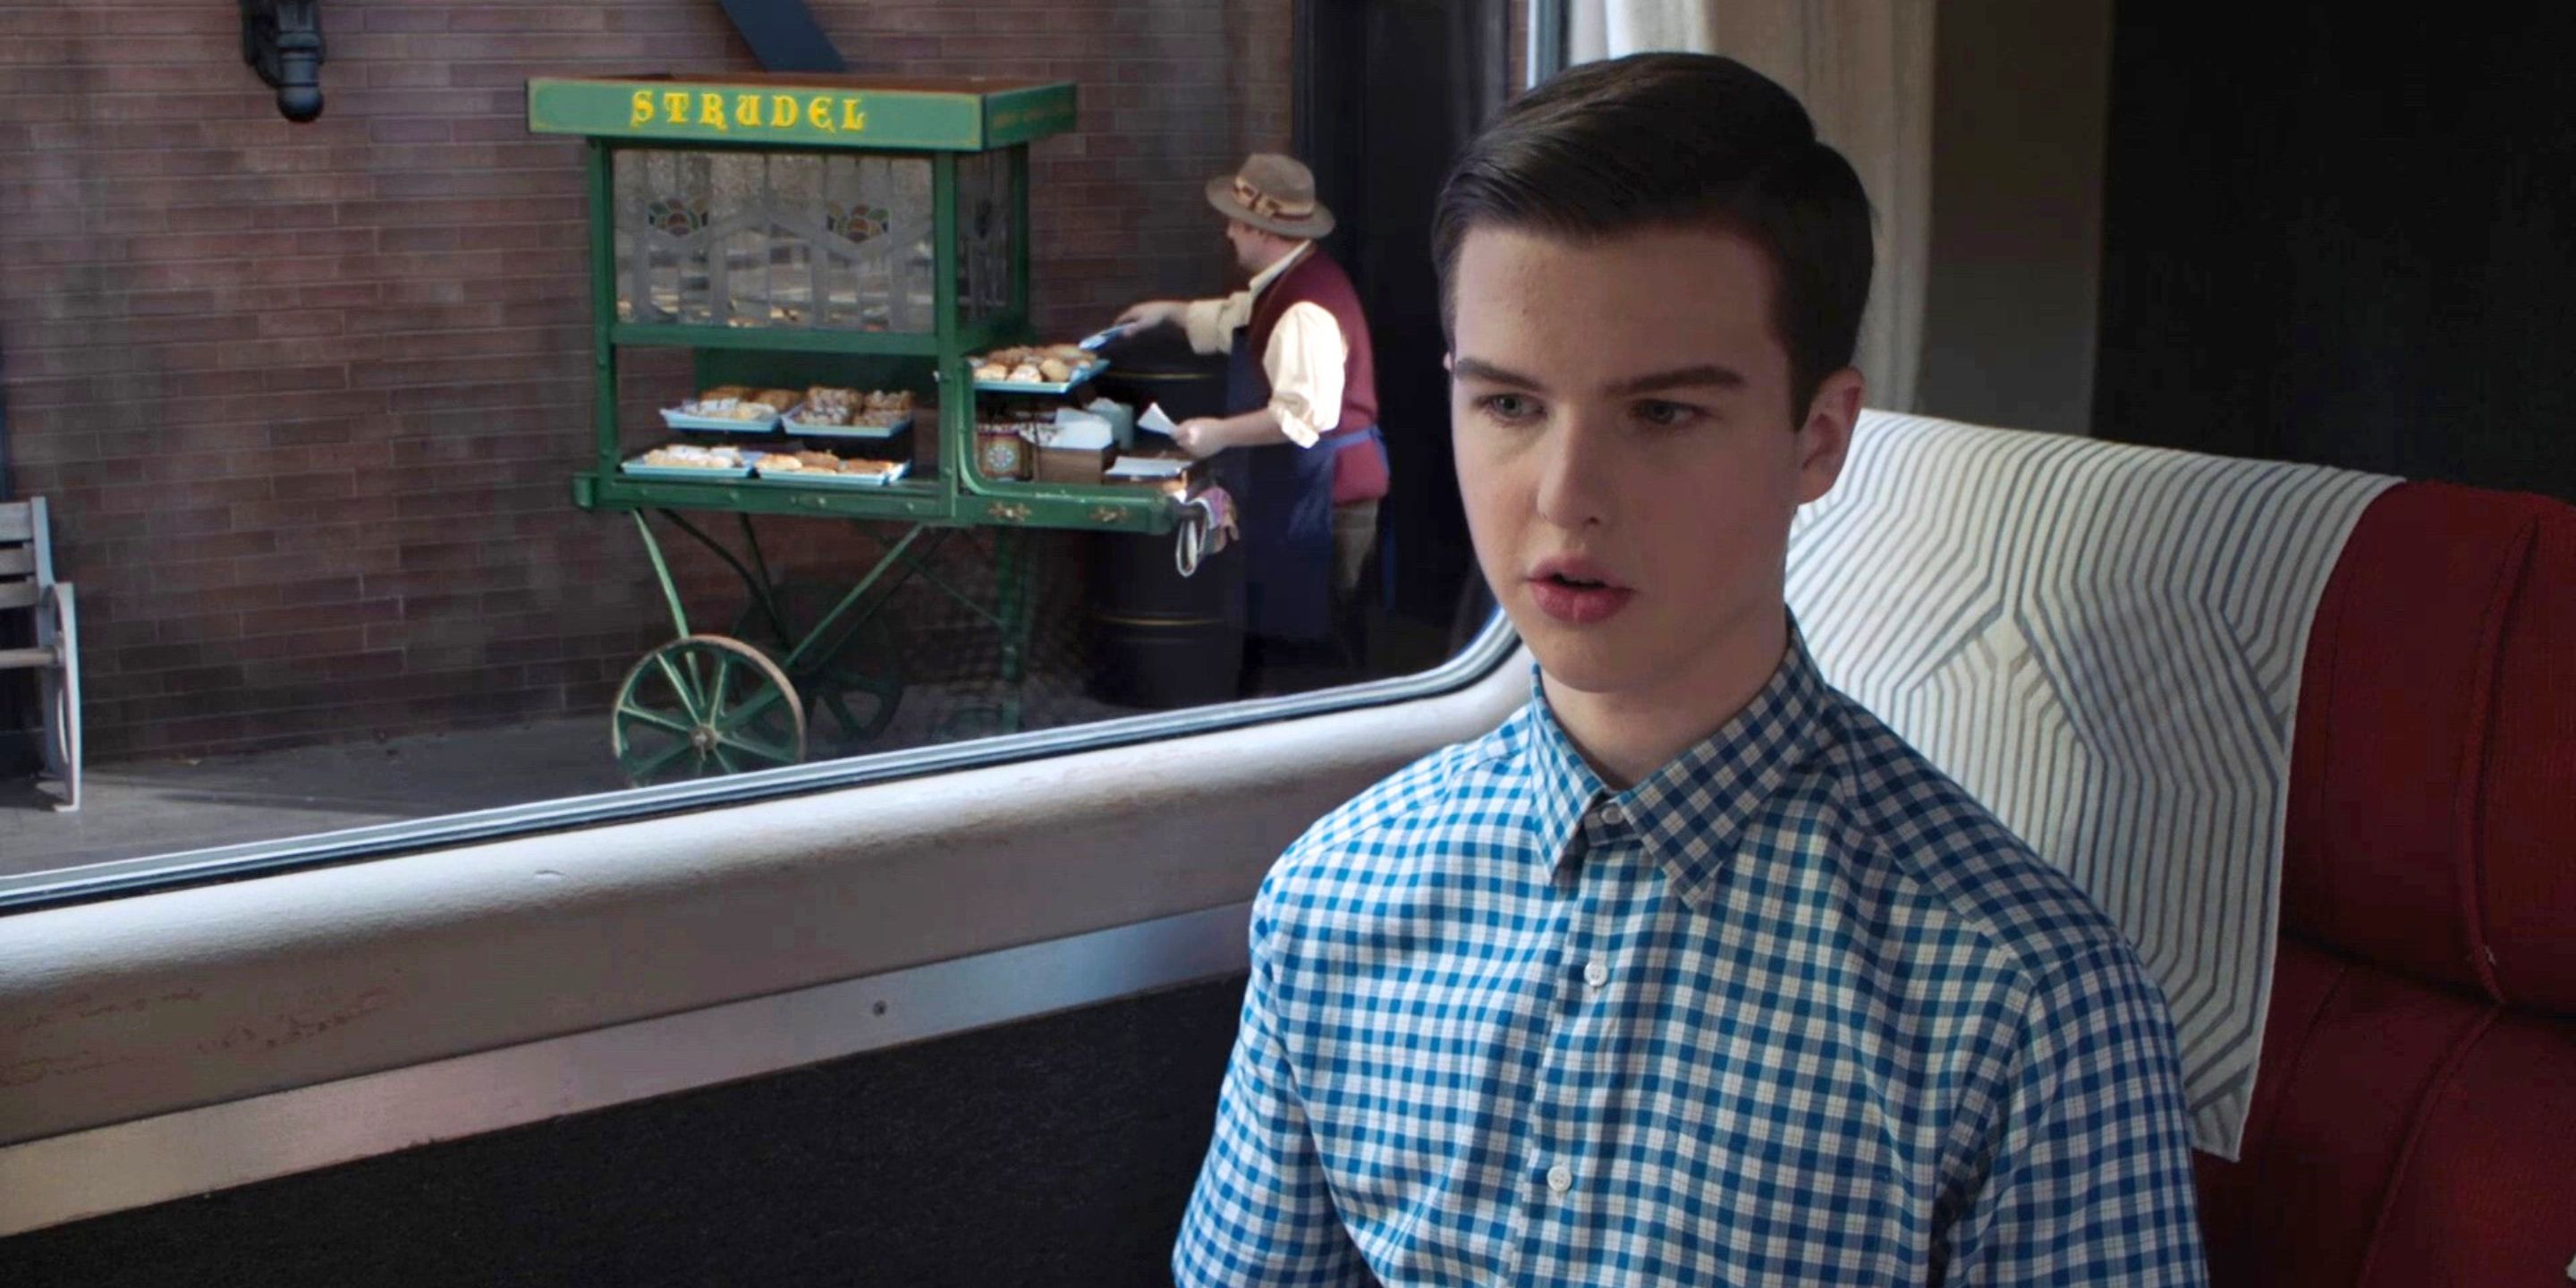 Sheldon Cooper, played by Iain Armitage, on a train in Germany in 'Young Sheldon'